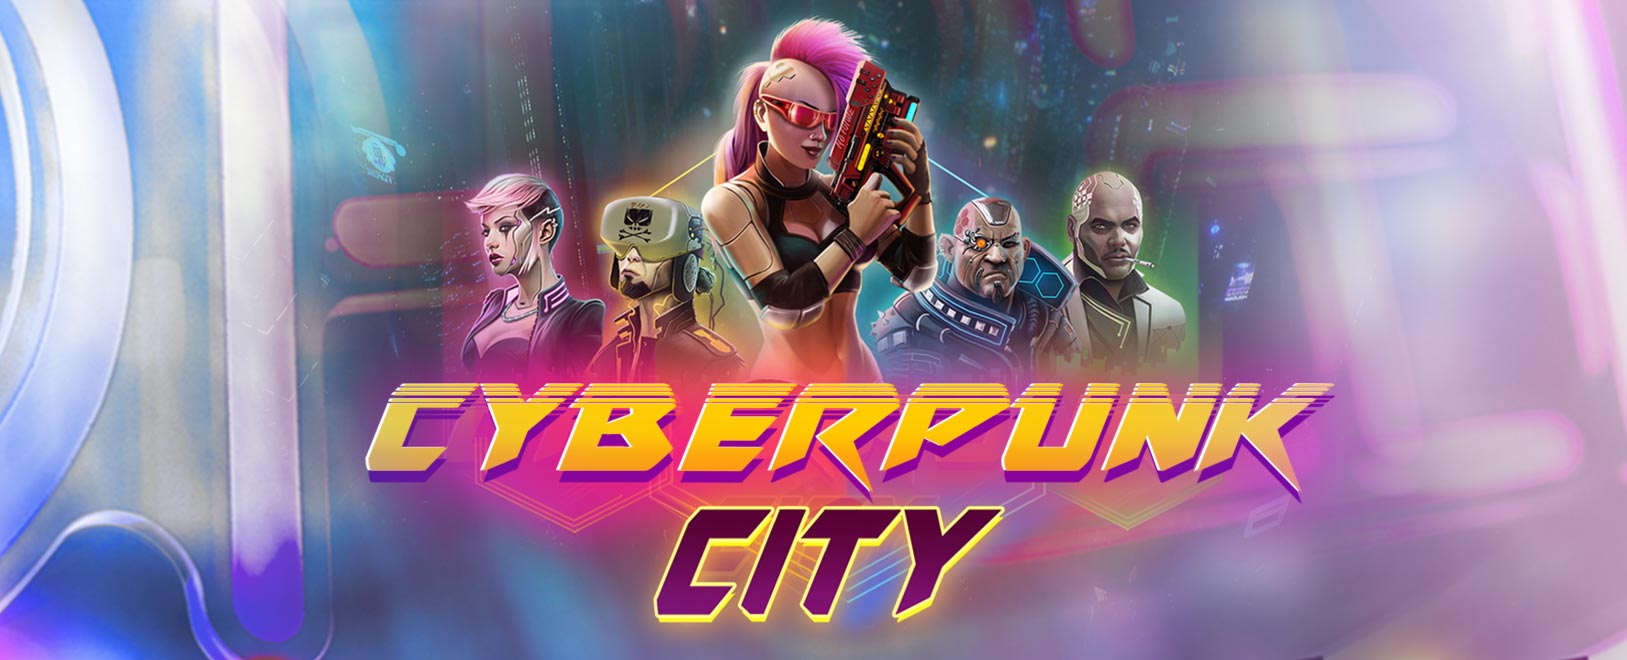 Play Cyberpunk City slot game at Cafe Casino